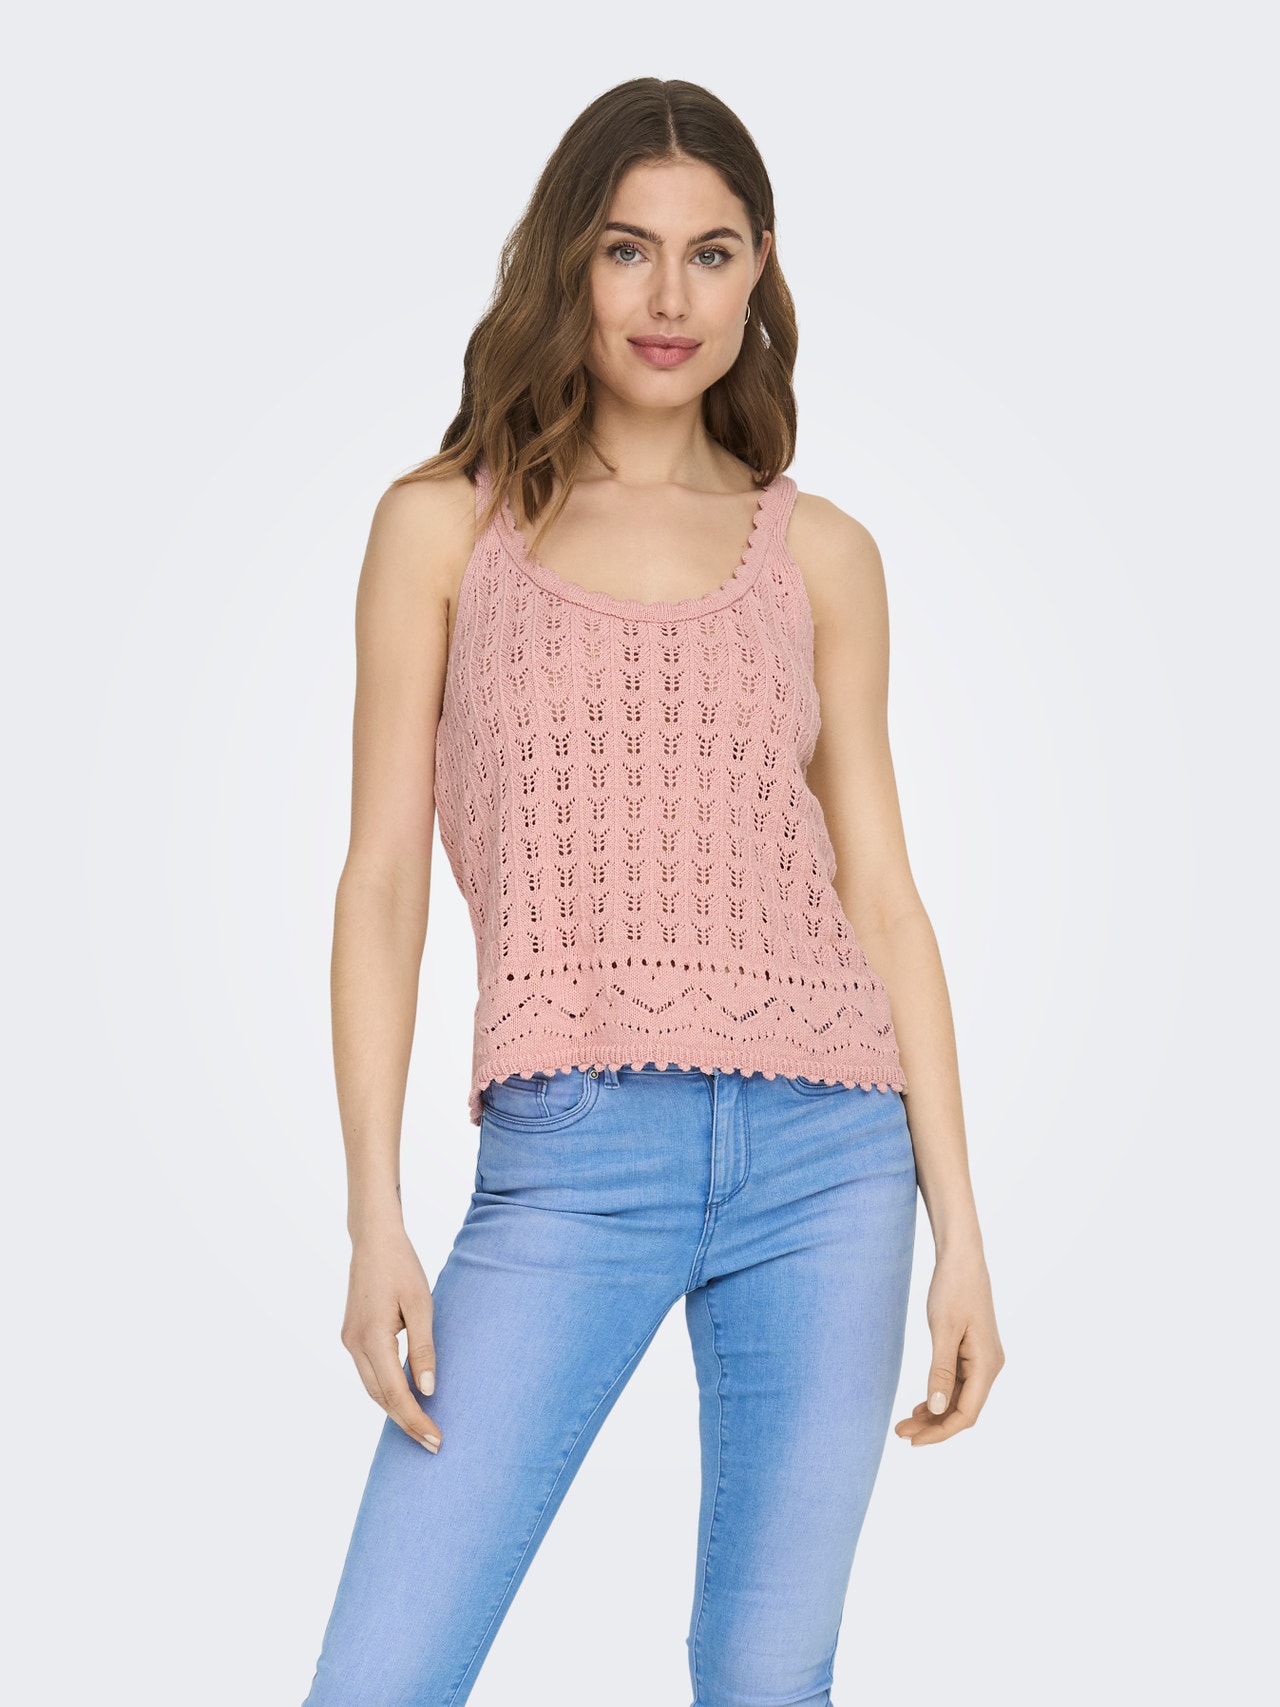 https://images.only.com/15287522/4260644/003/only-patternedv-neckknittop-rose.jpg?v=755b0094ddf1cc1a2493c5c76fc9bc2f&format=webp&width=1280&quality=90&key=25-0-3